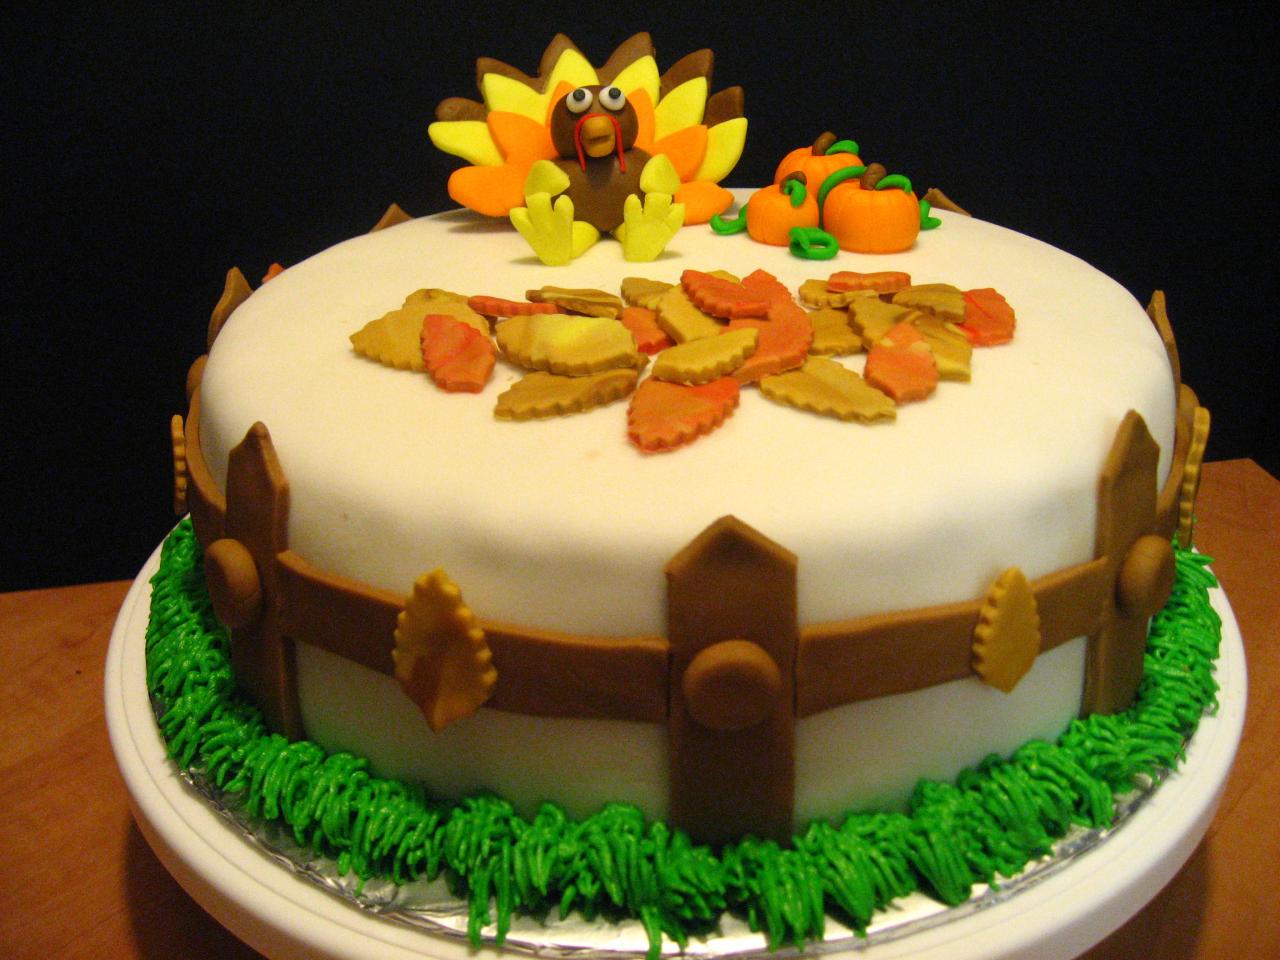 9 Easy Thanksgiving Cake Decorating Ideas to Wow Your Guests